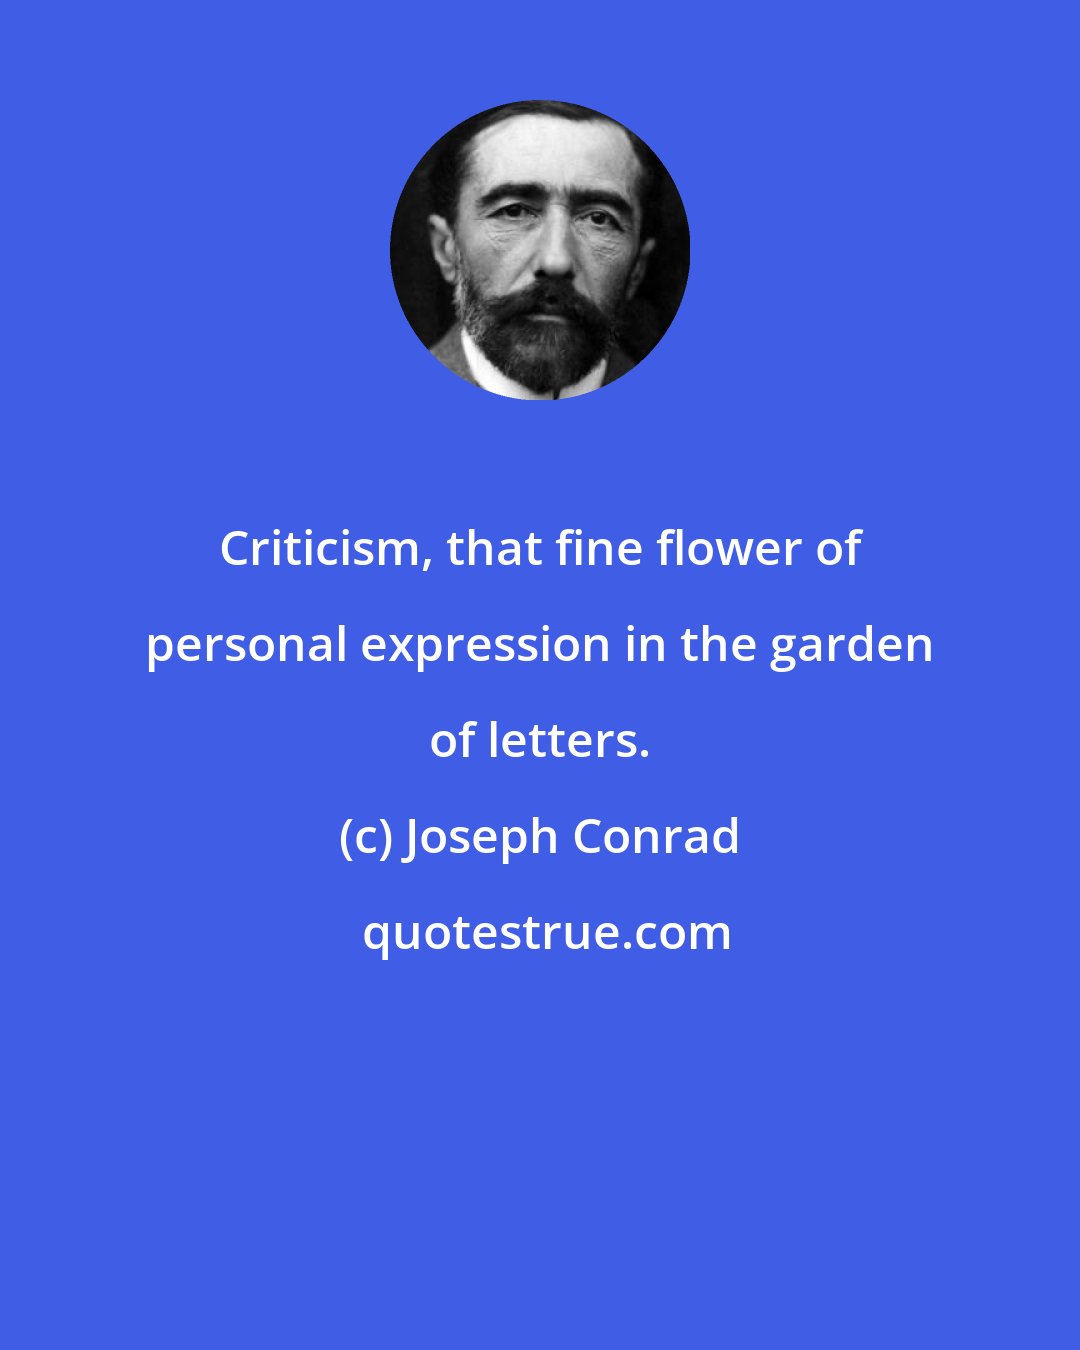 Joseph Conrad: Criticism, that fine flower of personal expression in the garden of letters.